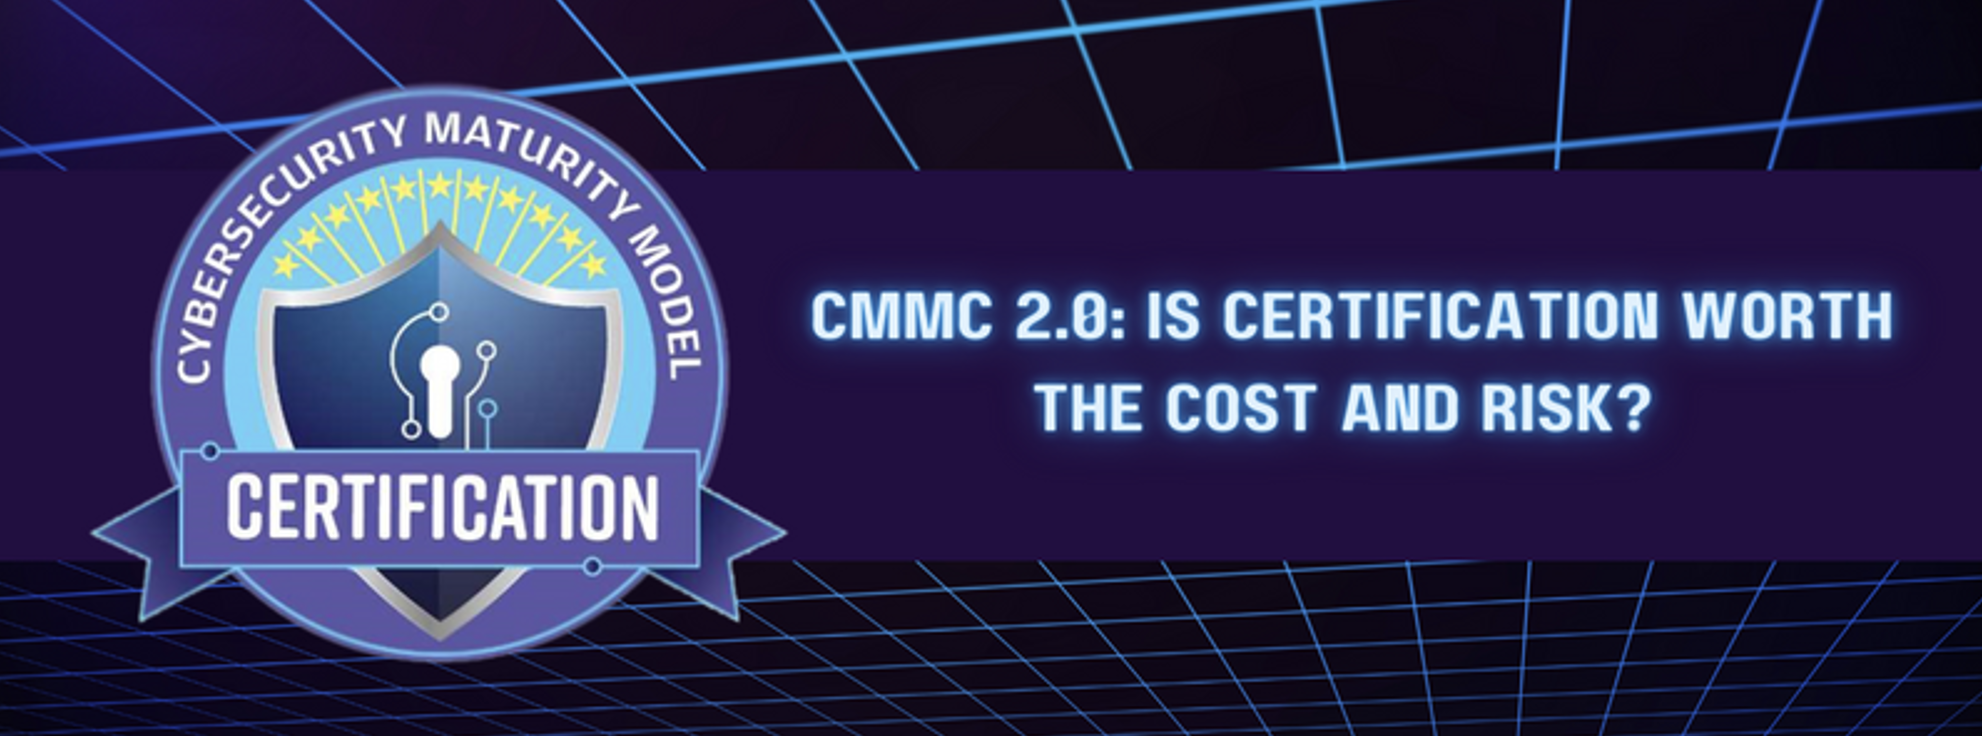 CMMC 2.0: Is Certification Worth the Cost and Risk?